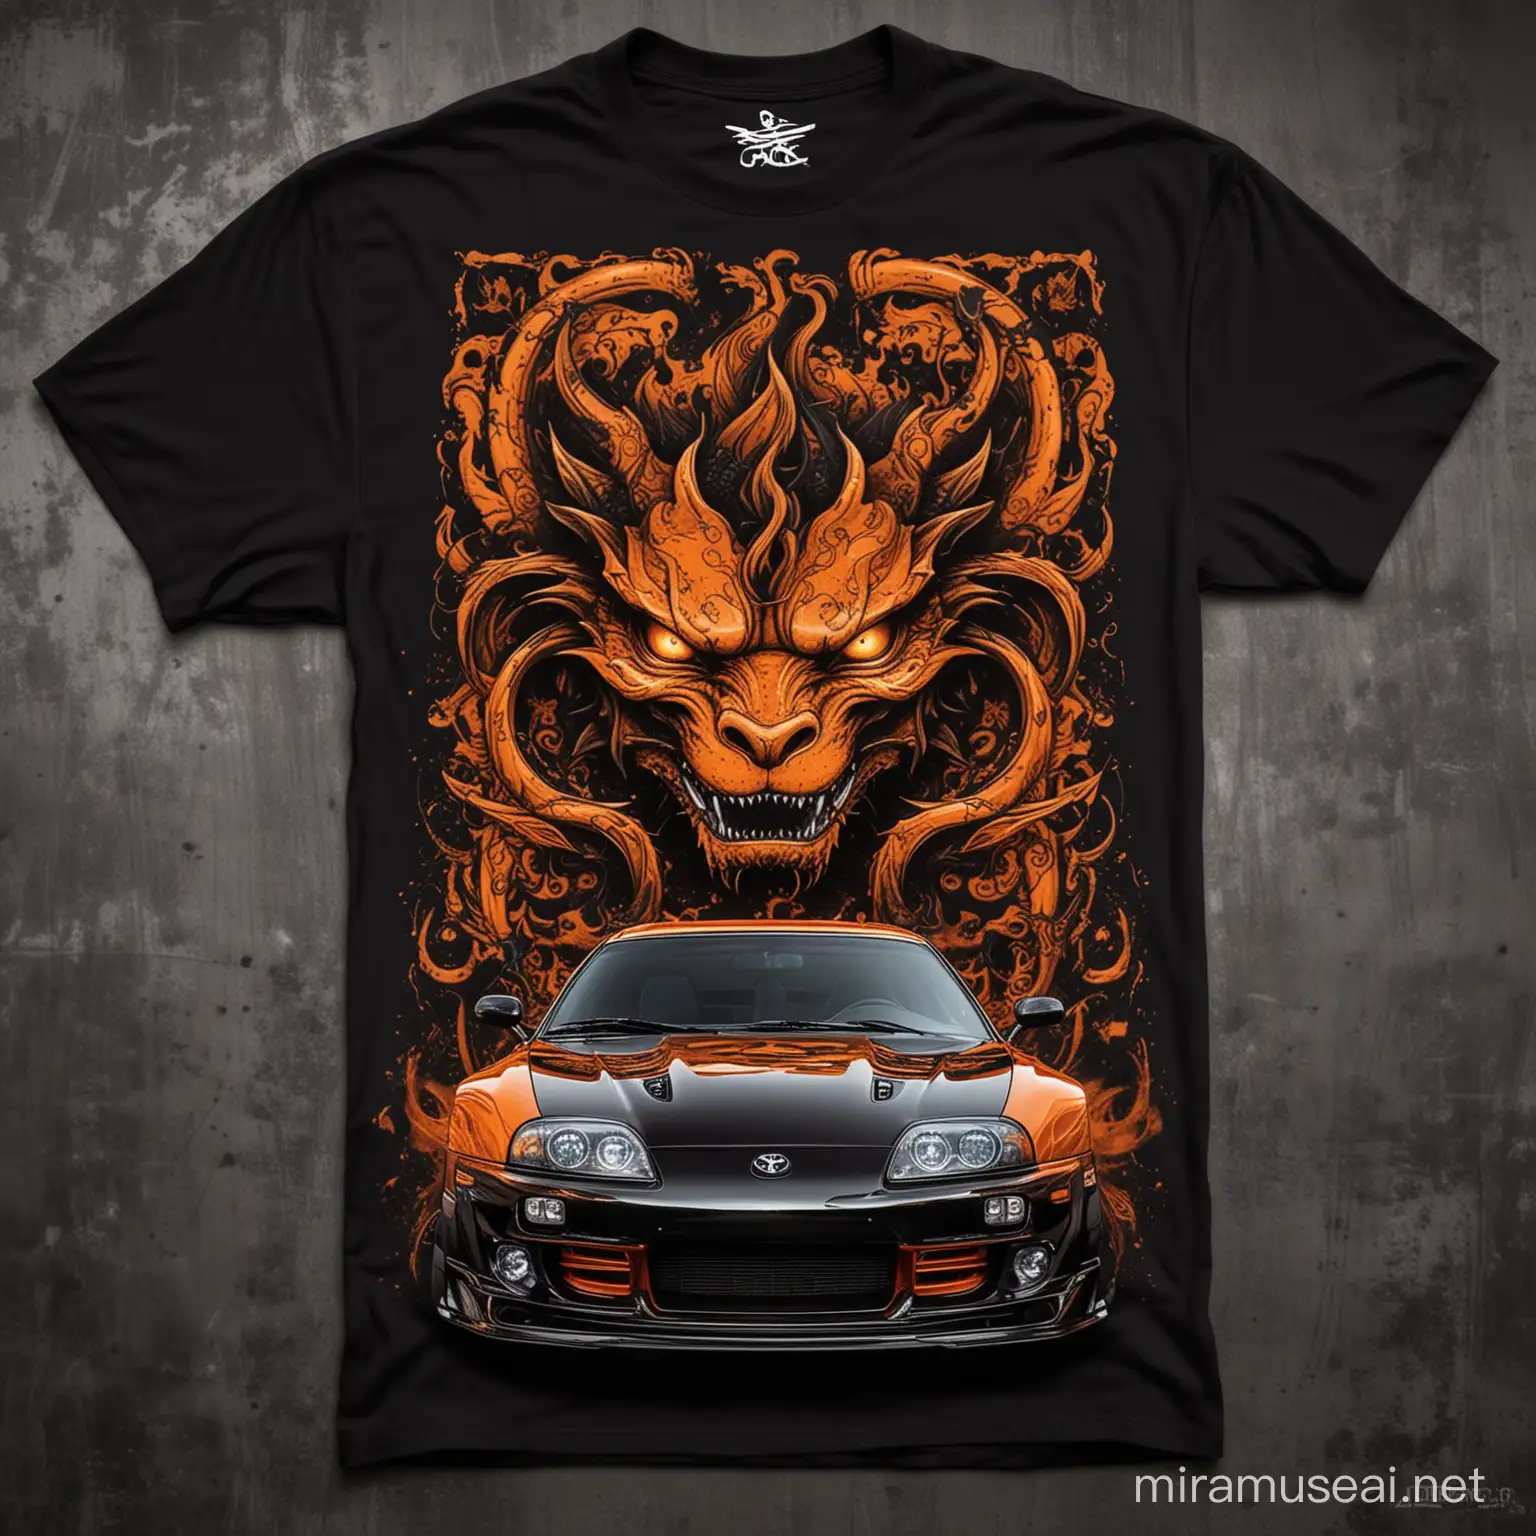 
Title: "Dragon's Fury: Custom Black and Orange Toyota Supra 1995 Mk4"

Description:
Imagine a mesmerizing design featuring a custom-built Toyota Supra 1995 Mk4, adorned in a striking black and orange color scheme that exudes power and ferocity. Against the backdrop, an intricate outline of a dragon's face emerges, its piercing gaze and menacing silhouette adding an element of mystique and intrigue to the composition. With meticulous attention to detail and a passion for automotive excellence, this design captures the essence of speed, adrenaline, and untamed energy. Perfect for enthusiasts who appreciate bold and dynamic style, this t-shirt design is sure to turn heads and ignite the imagination.